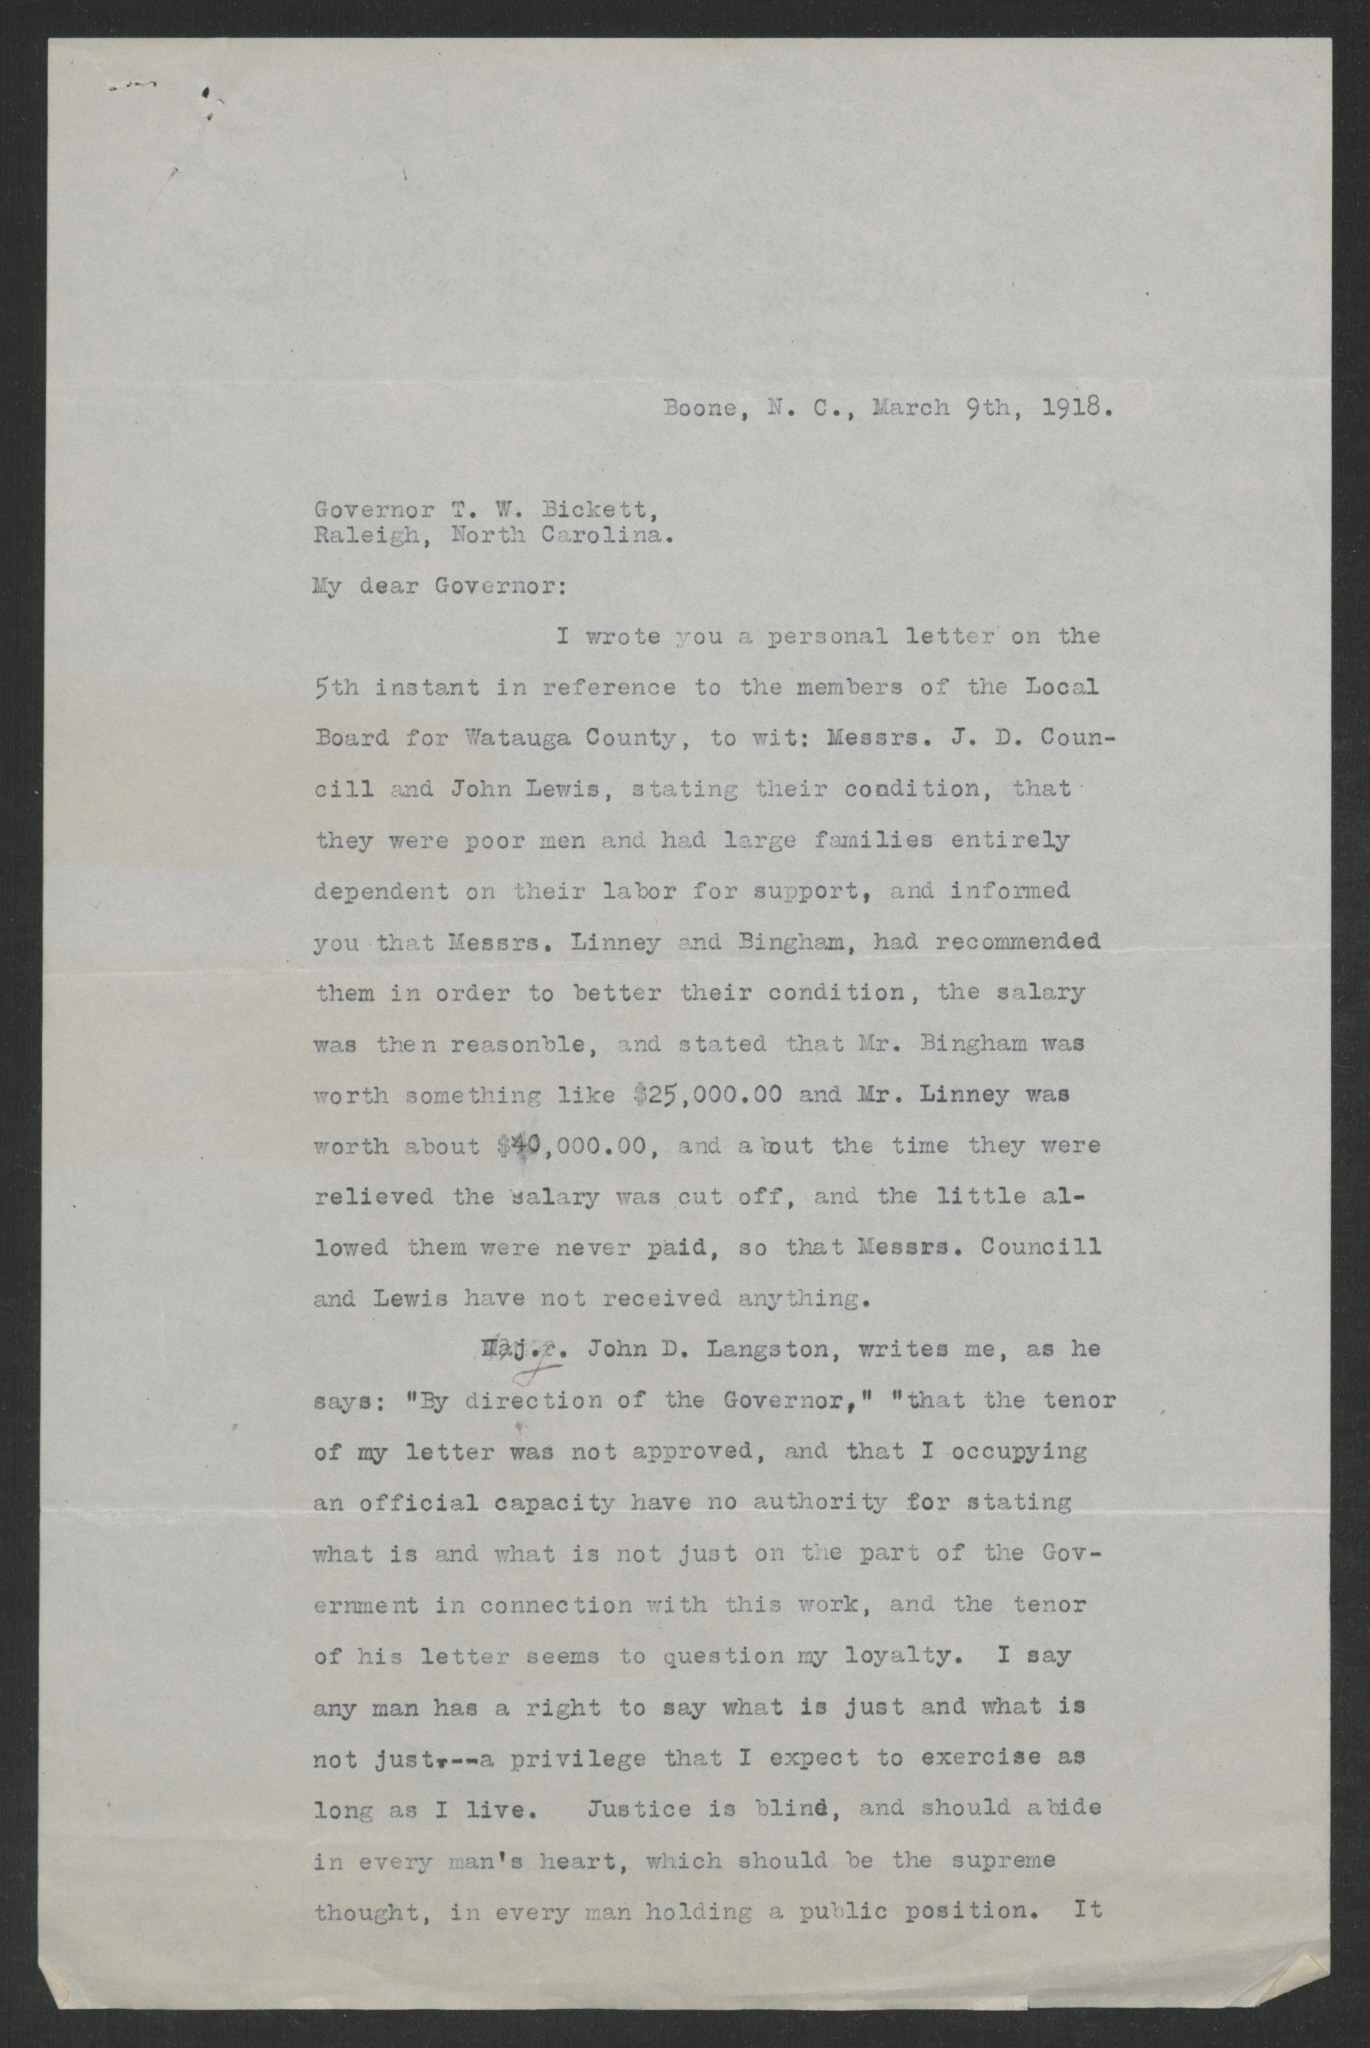 Letter from Edward F. Lovill to Thomas W. Bickett, March 9, 1918, page 1